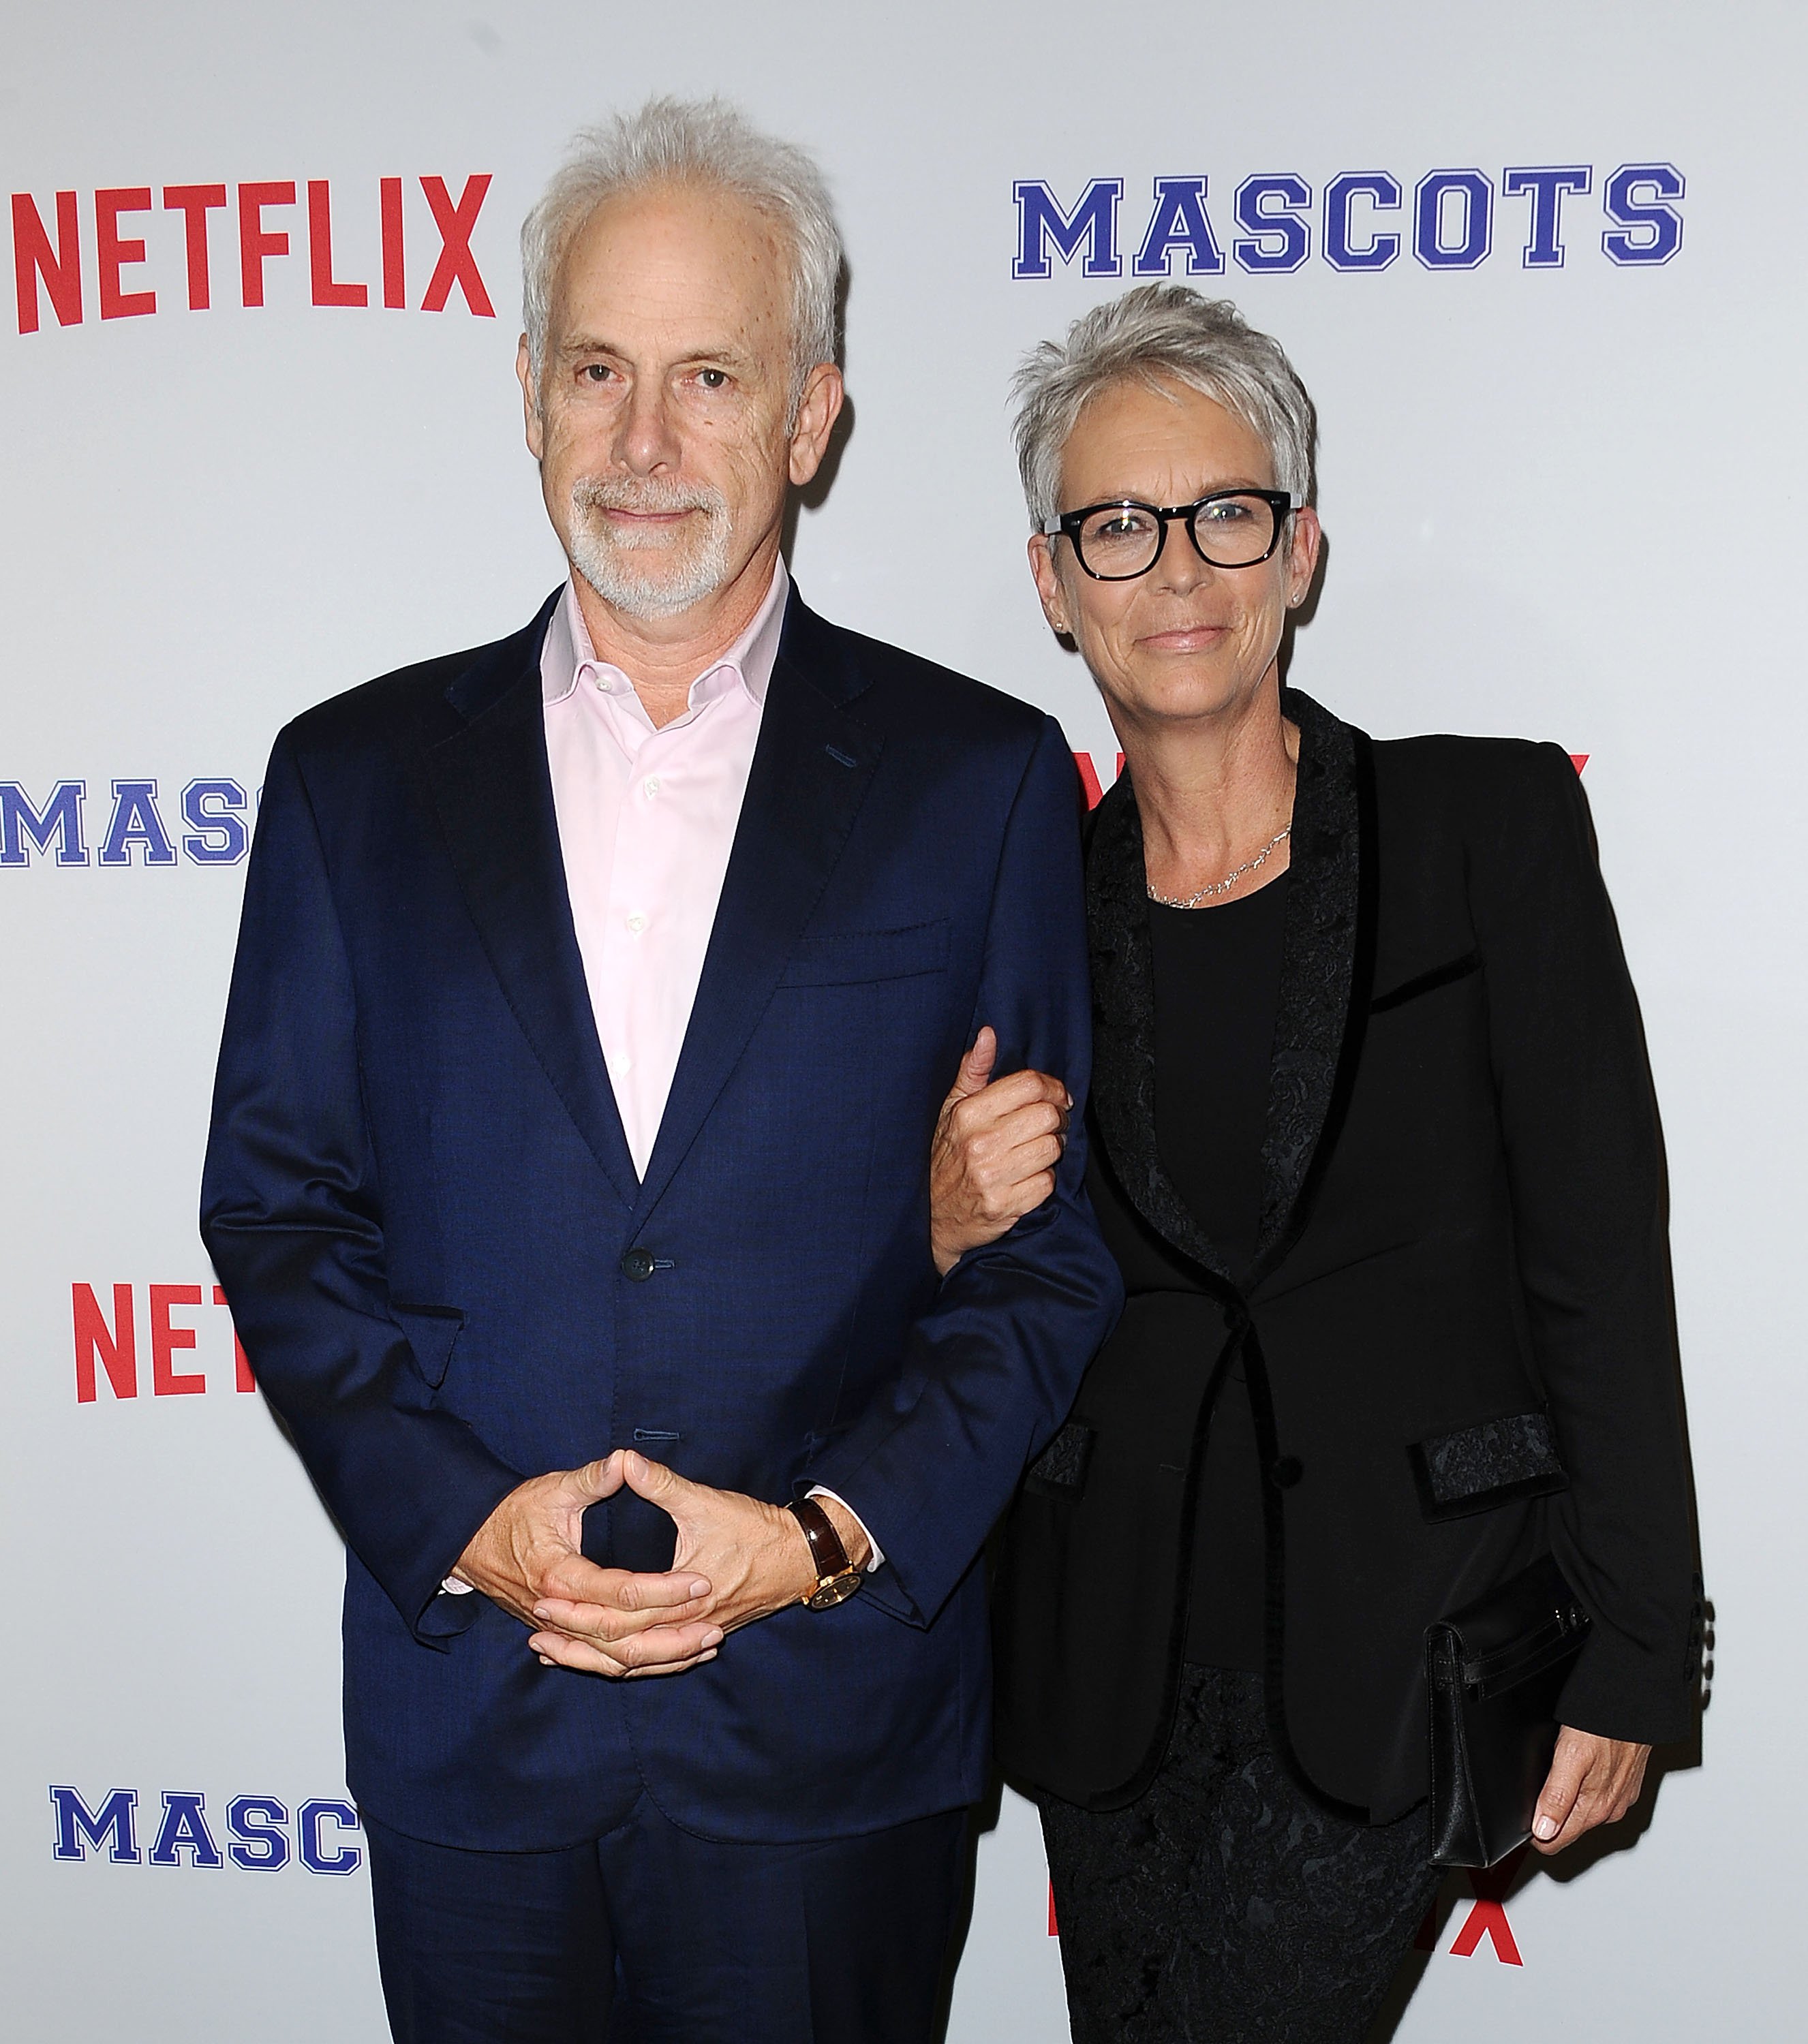 Director Christopher Guest and actress Jamie Lee Curtis attend a screening of "Mascots" at Linwood Dunn Theater on October 5, 2016 in Los Angeles, California. | Source: Getty Images